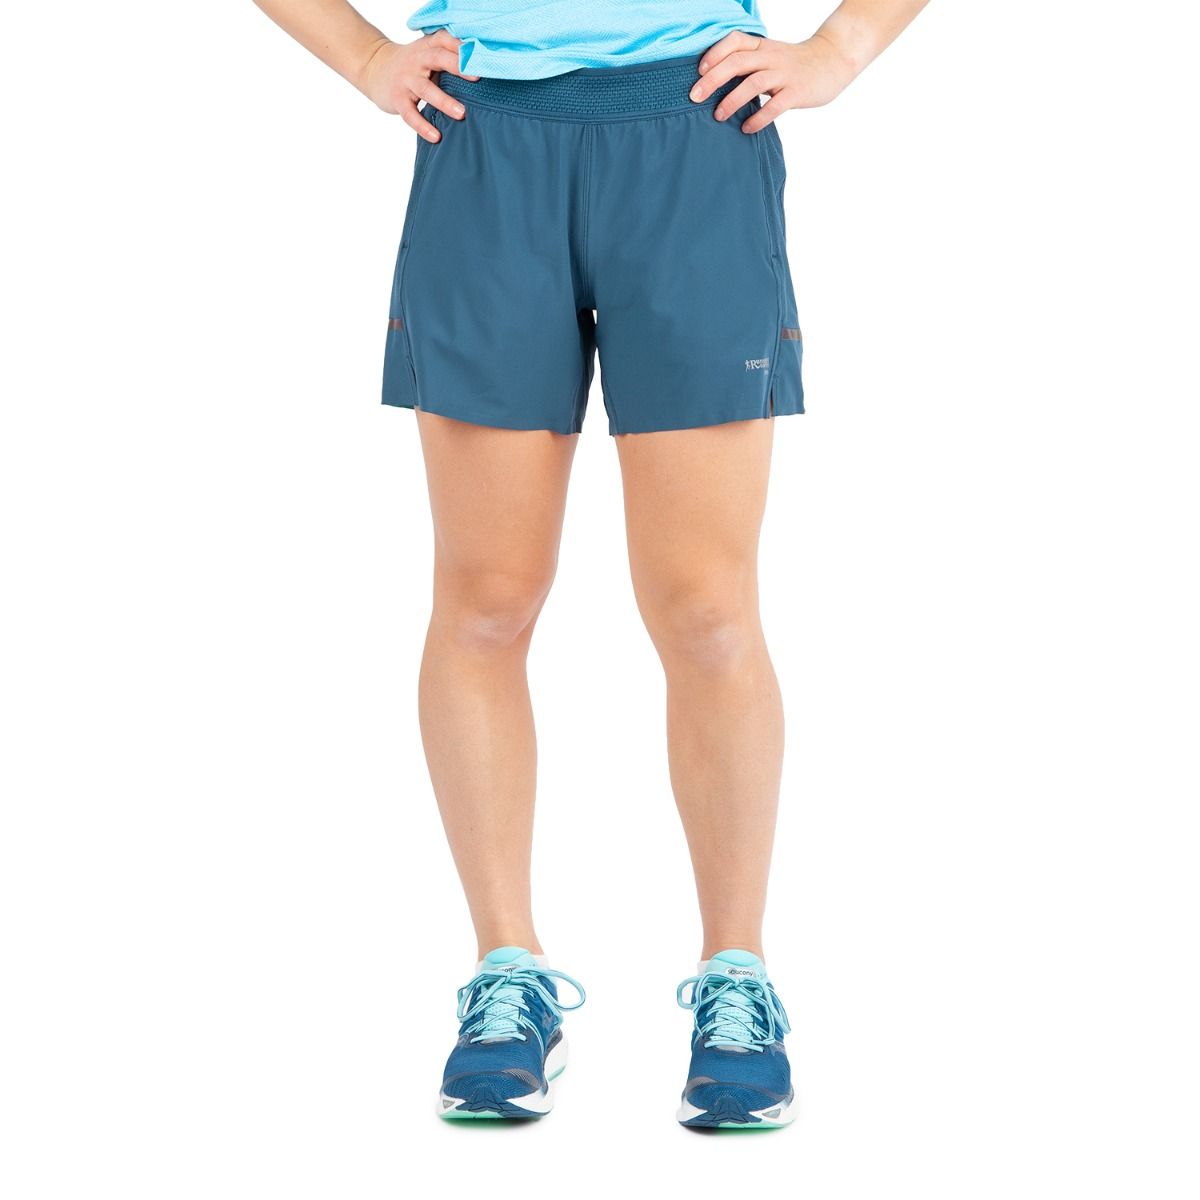 Plus Size Running Shorts That Stay Put (FINALLY)